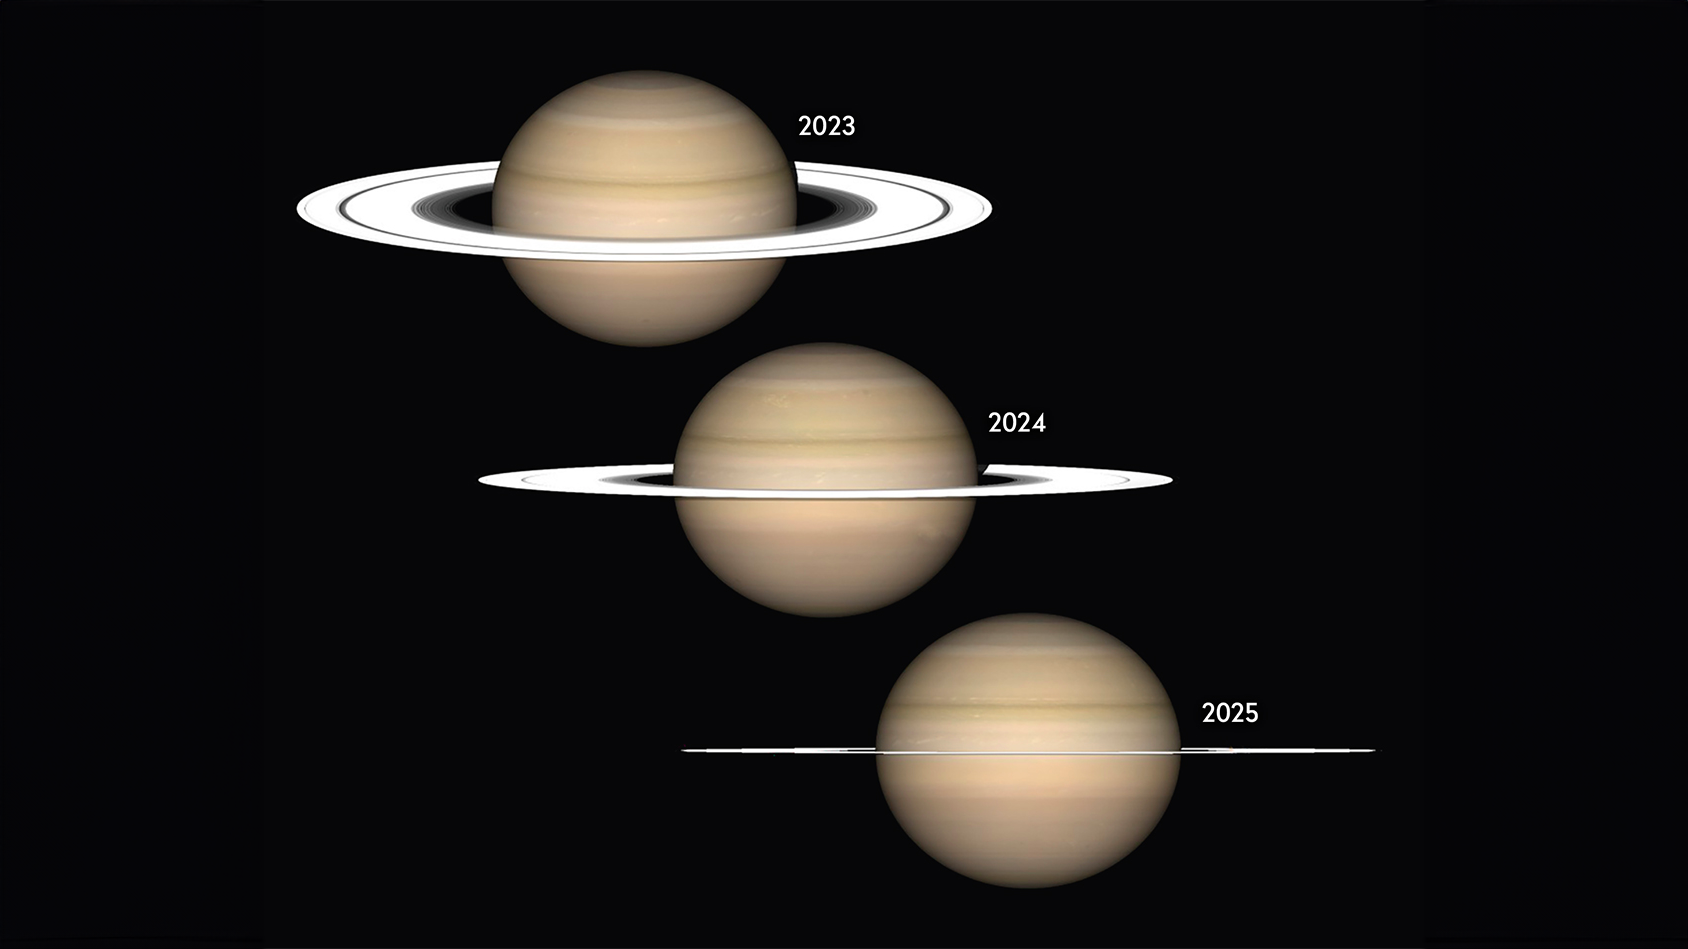 Three images of Saturn's changing rings between 2023, 2024, and 2025, where the rings are most visible in 2023, less visible in 2024, and least visible in 2025.